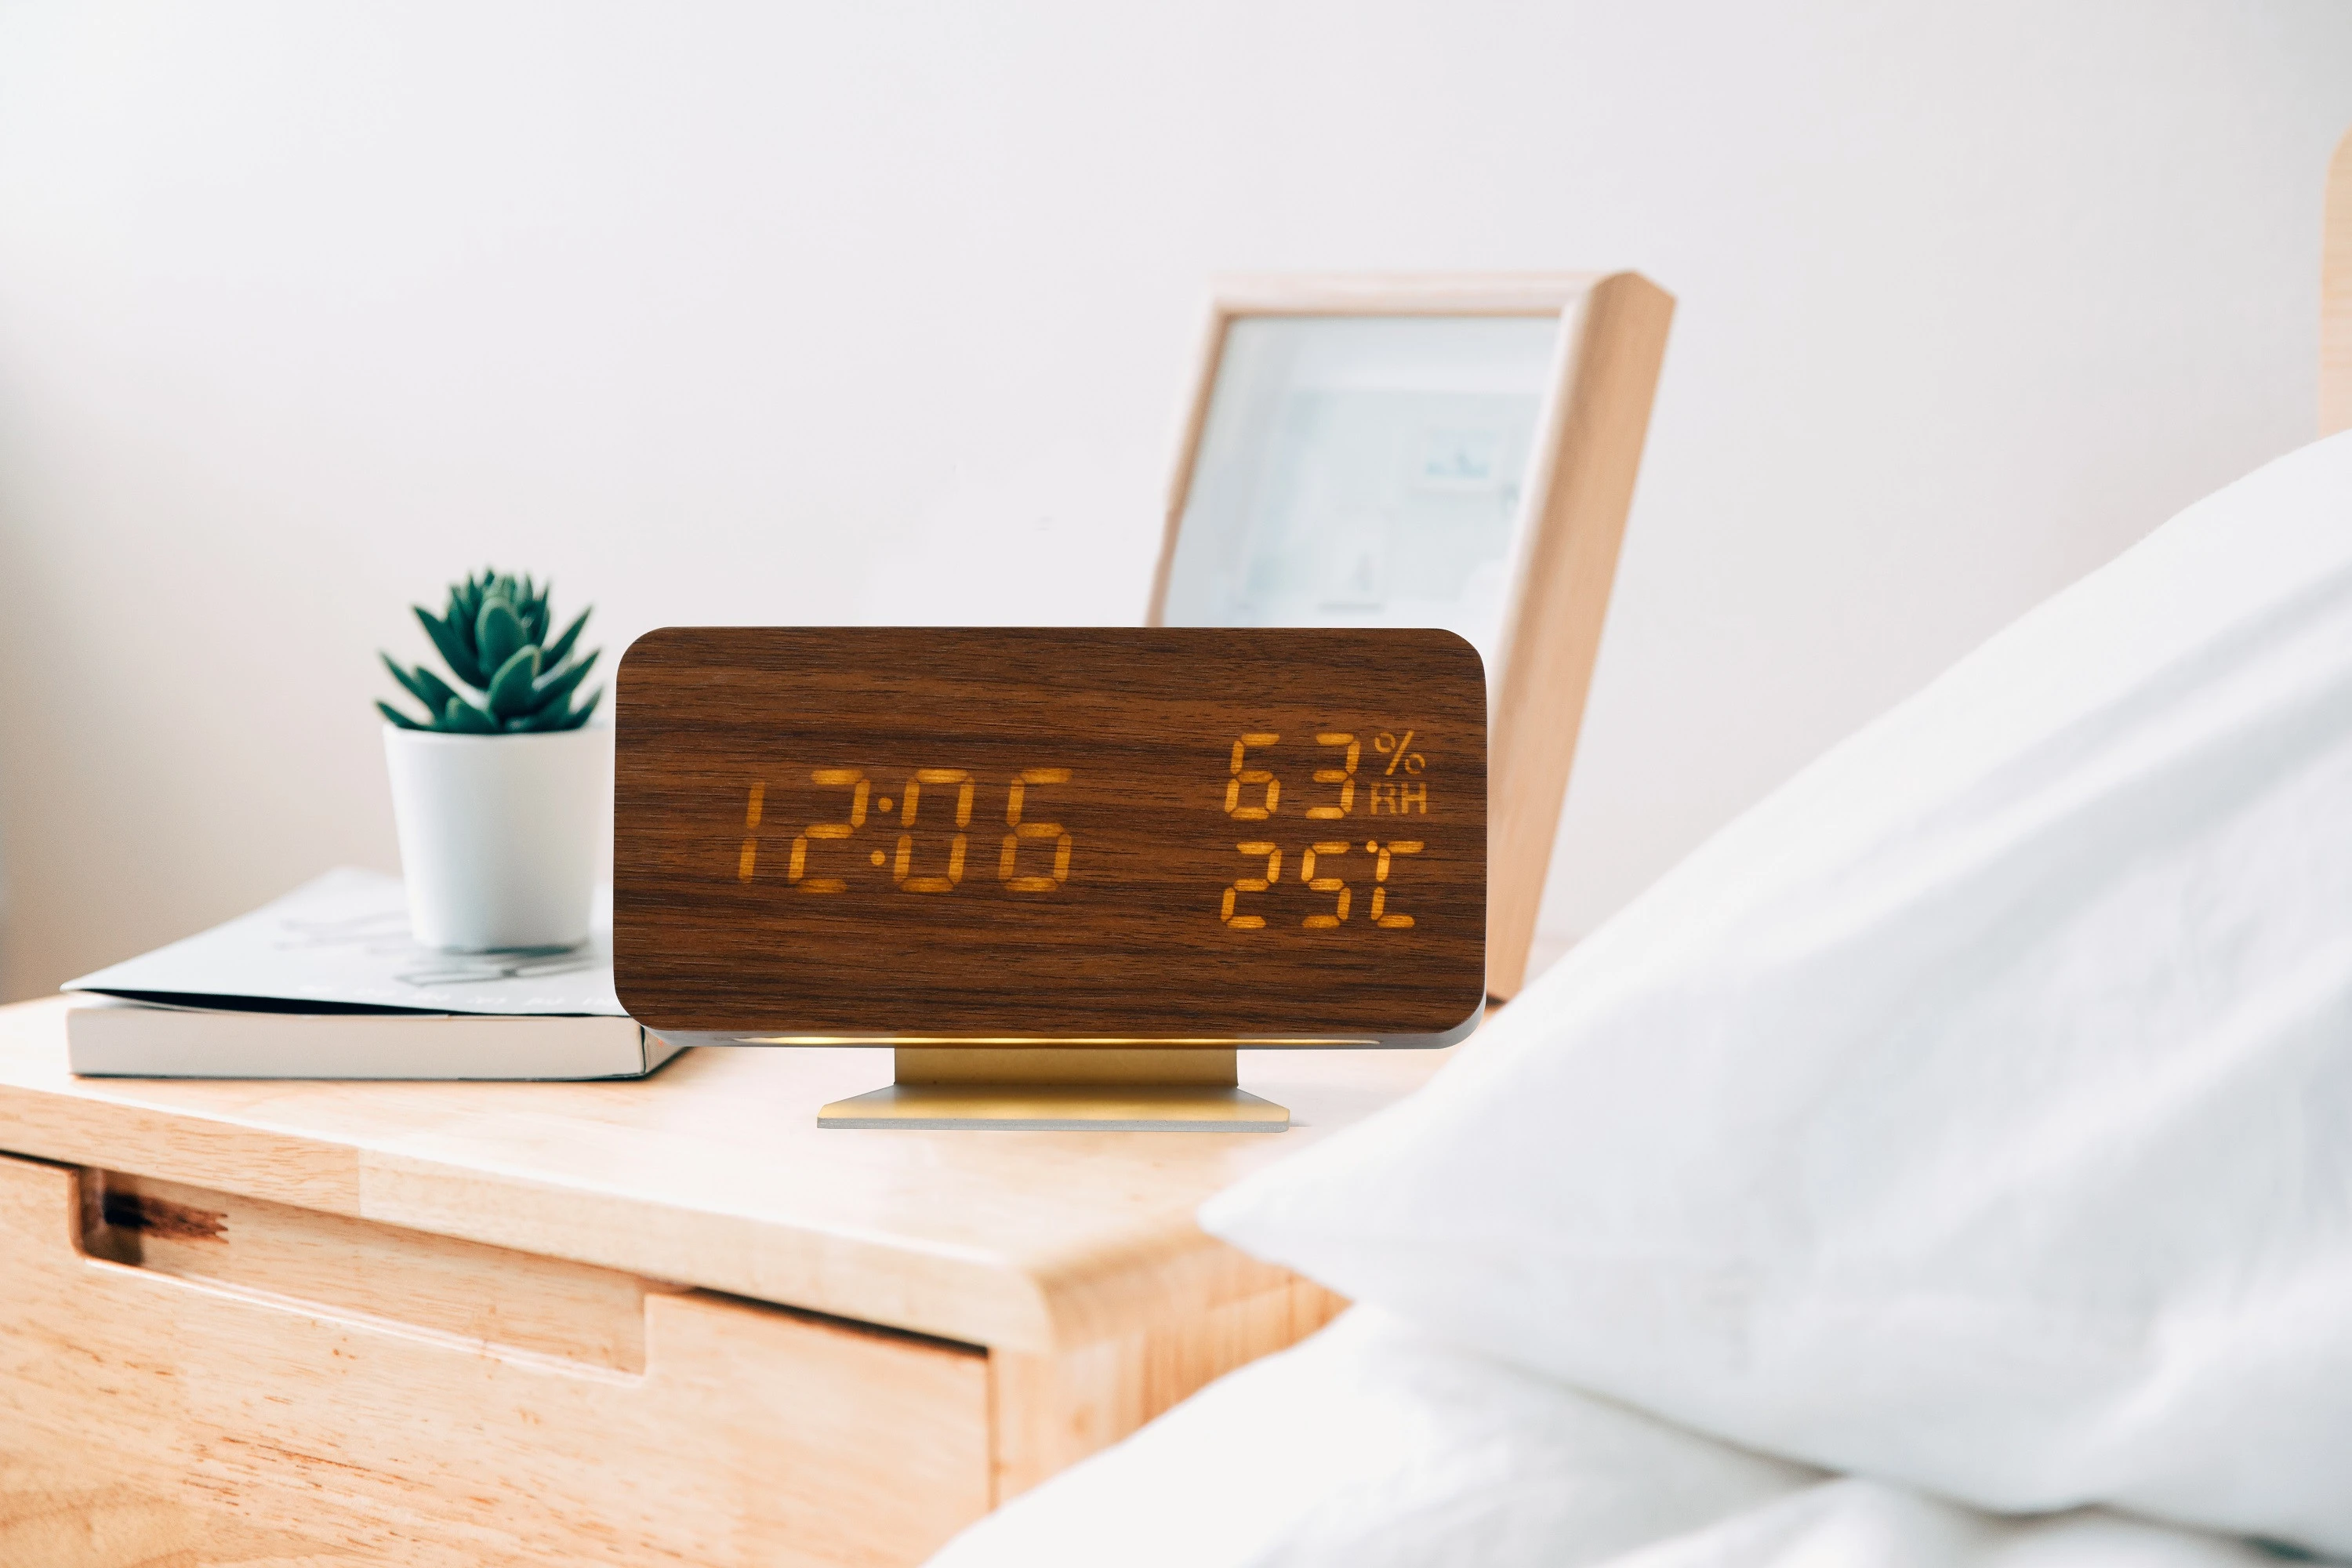 Wooden Alarm Clock Wood LED Digital Clock Sound Control Function, Time Date, Temperature Display for Bedroom Office Home